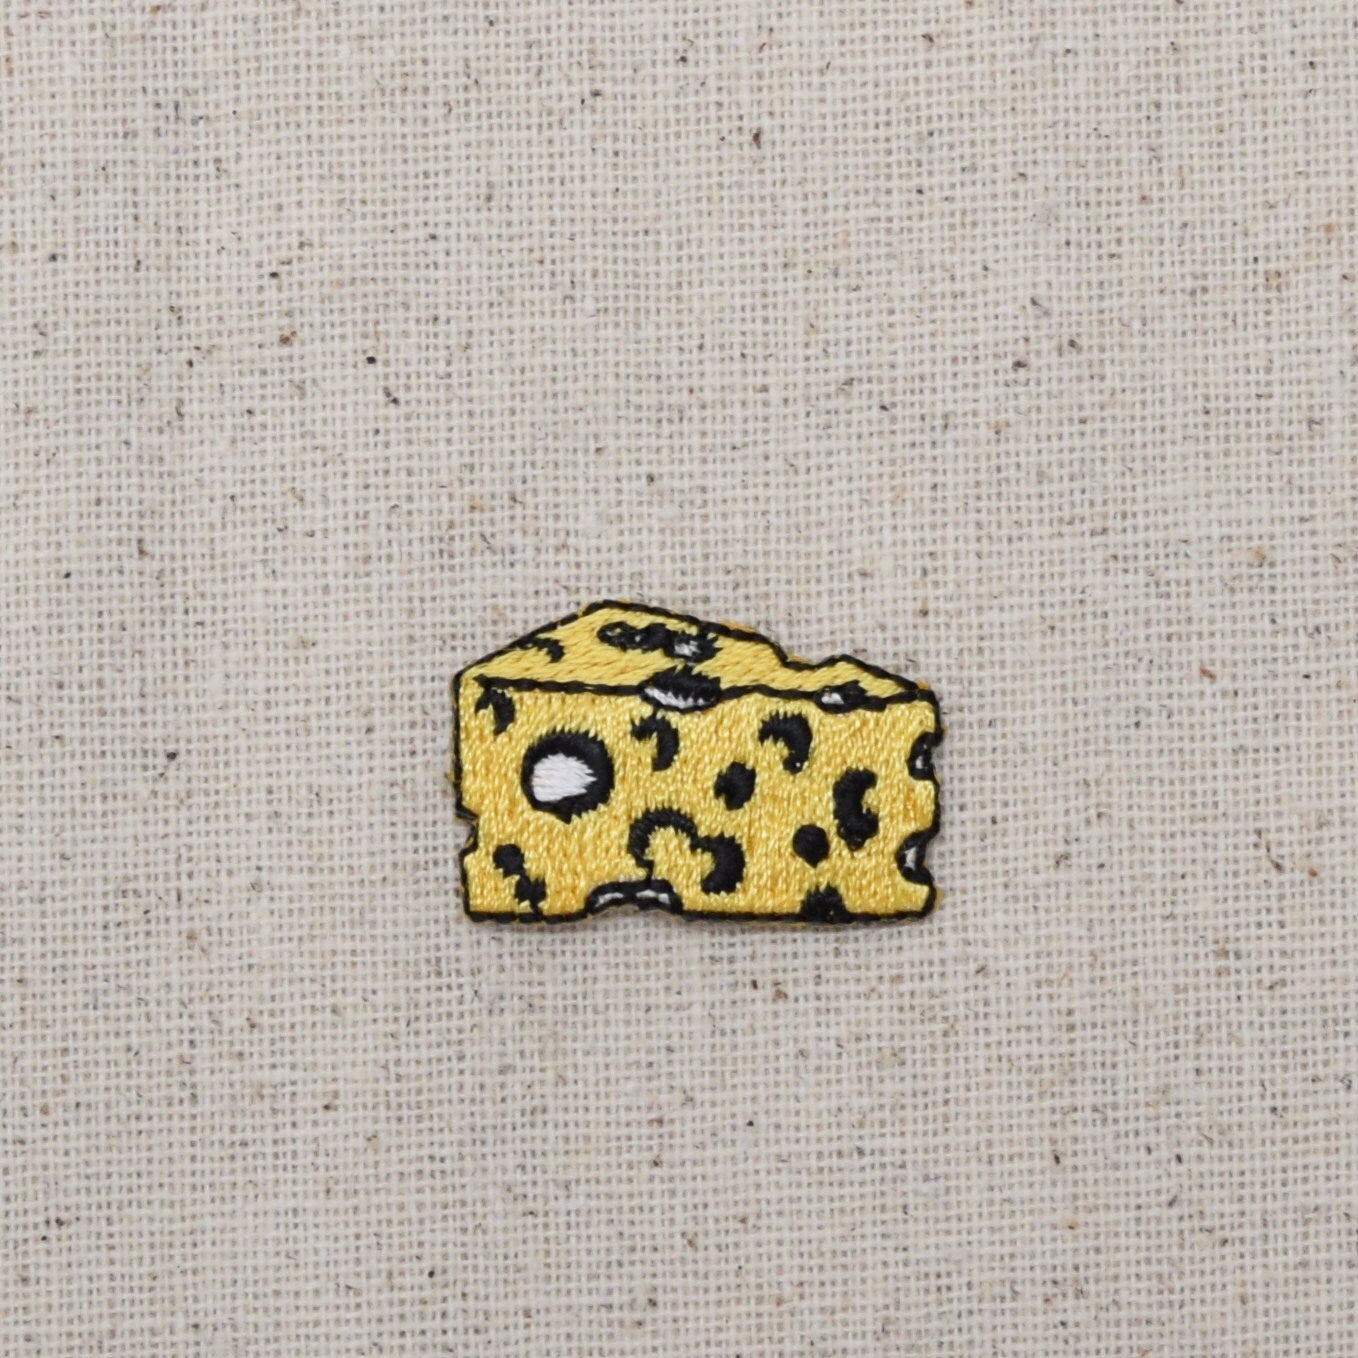 Cheese Wedge - Food - Yellow - Swiss - Embroidered Iron on Patch